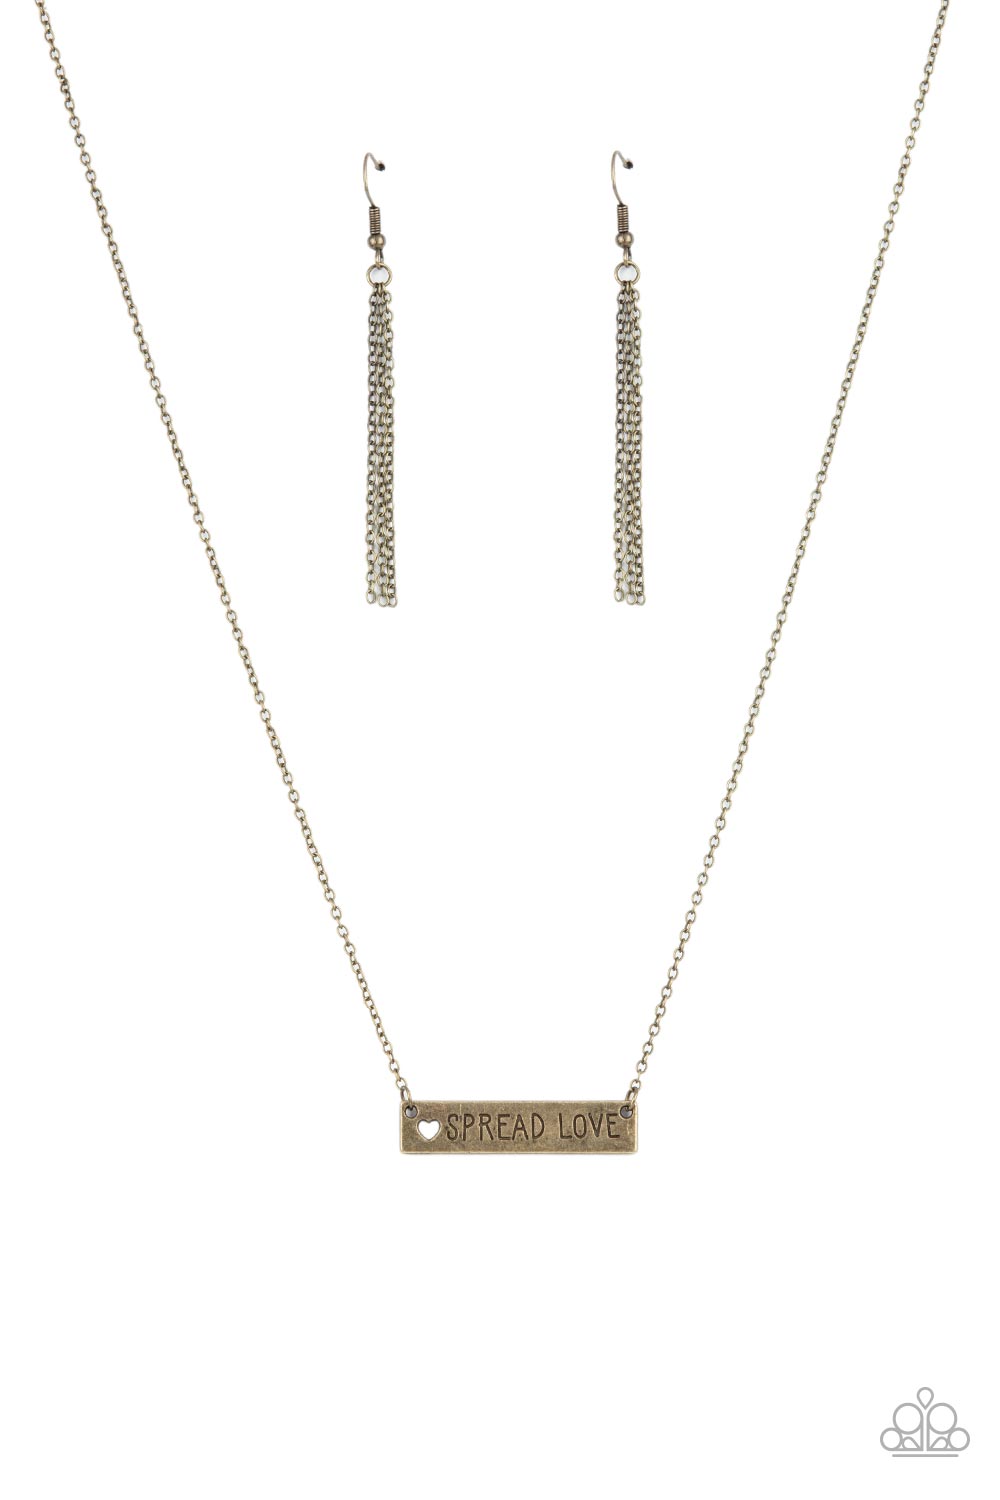 Paparazzi Jewelry & Accessories - Spread Love - Brass Necklace. Bling By Titia Boutique